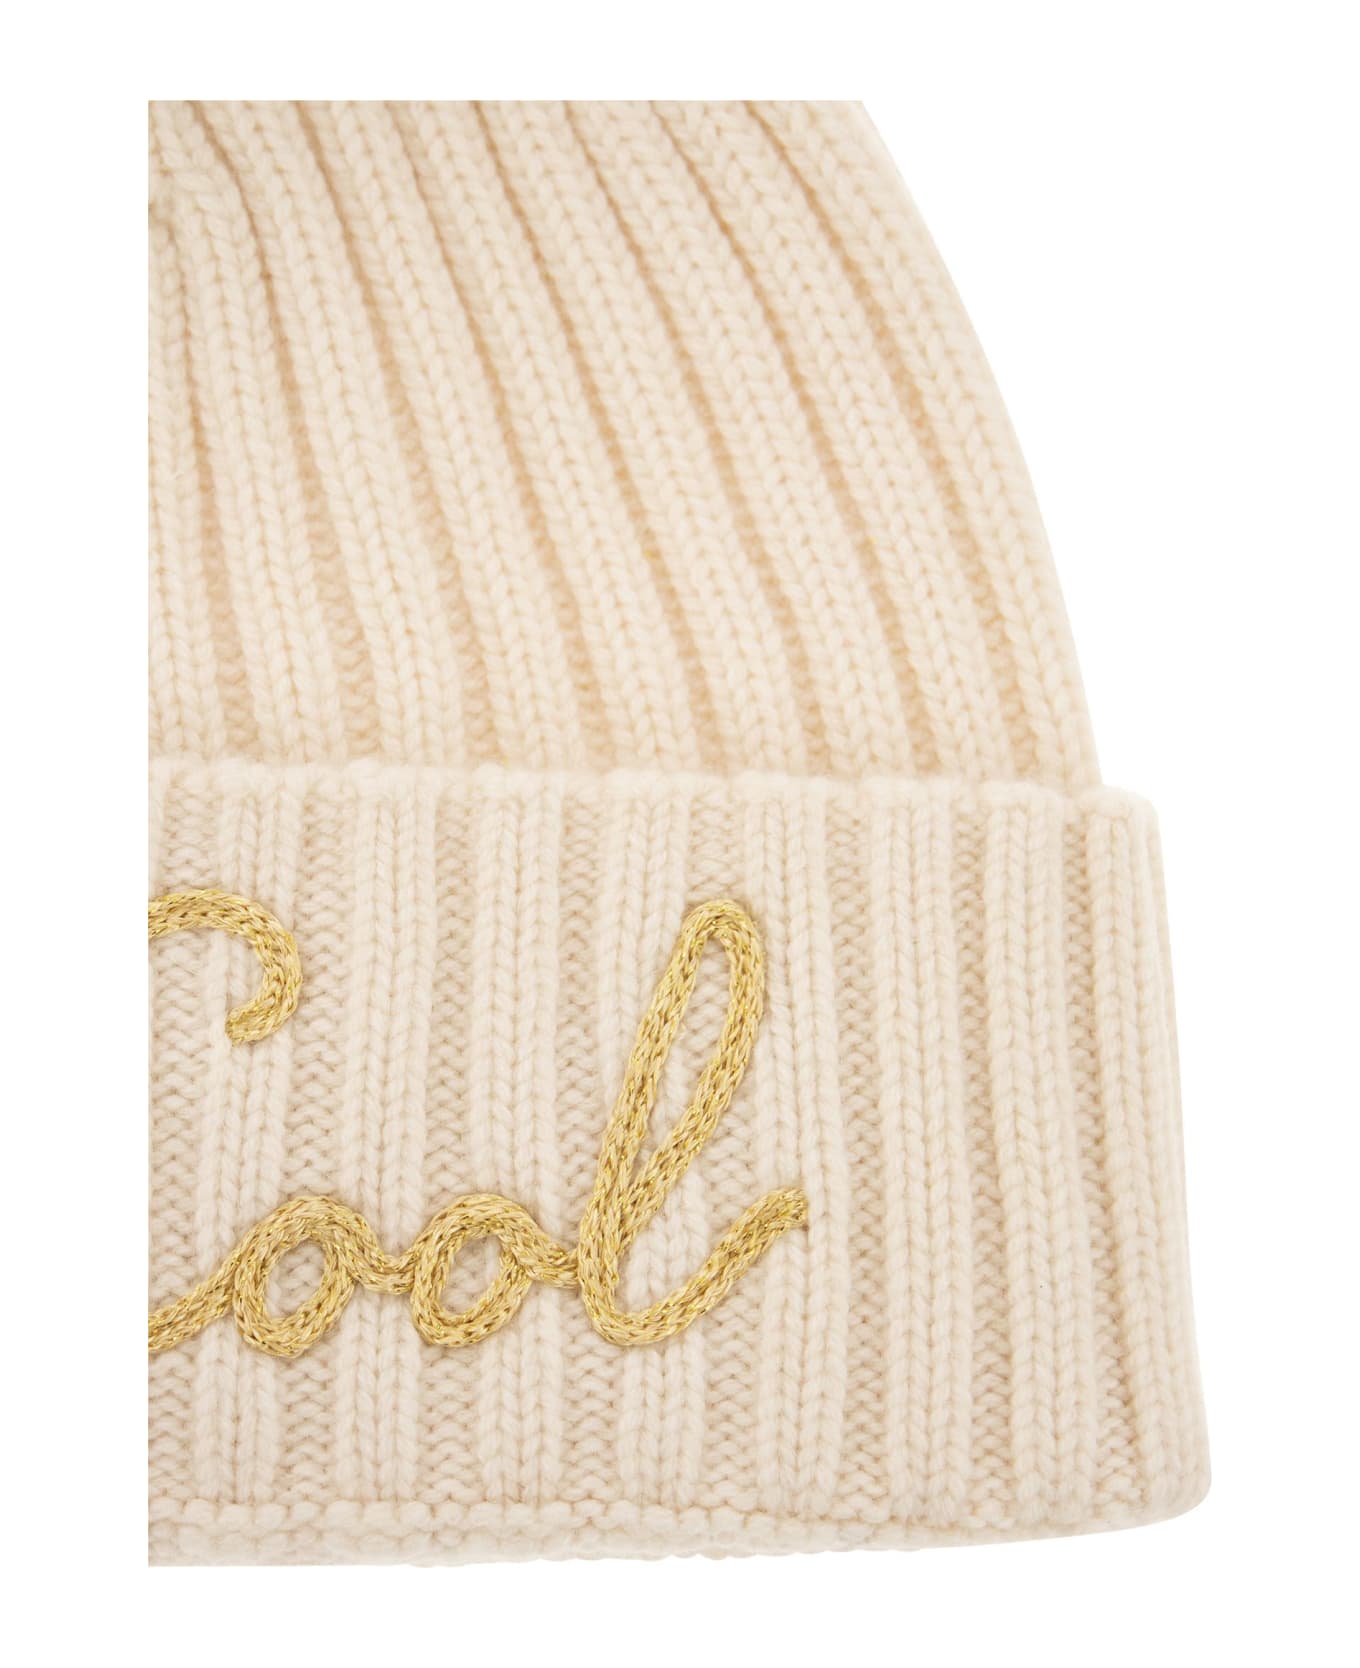 MC2 Saint Barth Hat With Pompom And Embroidery - Cream